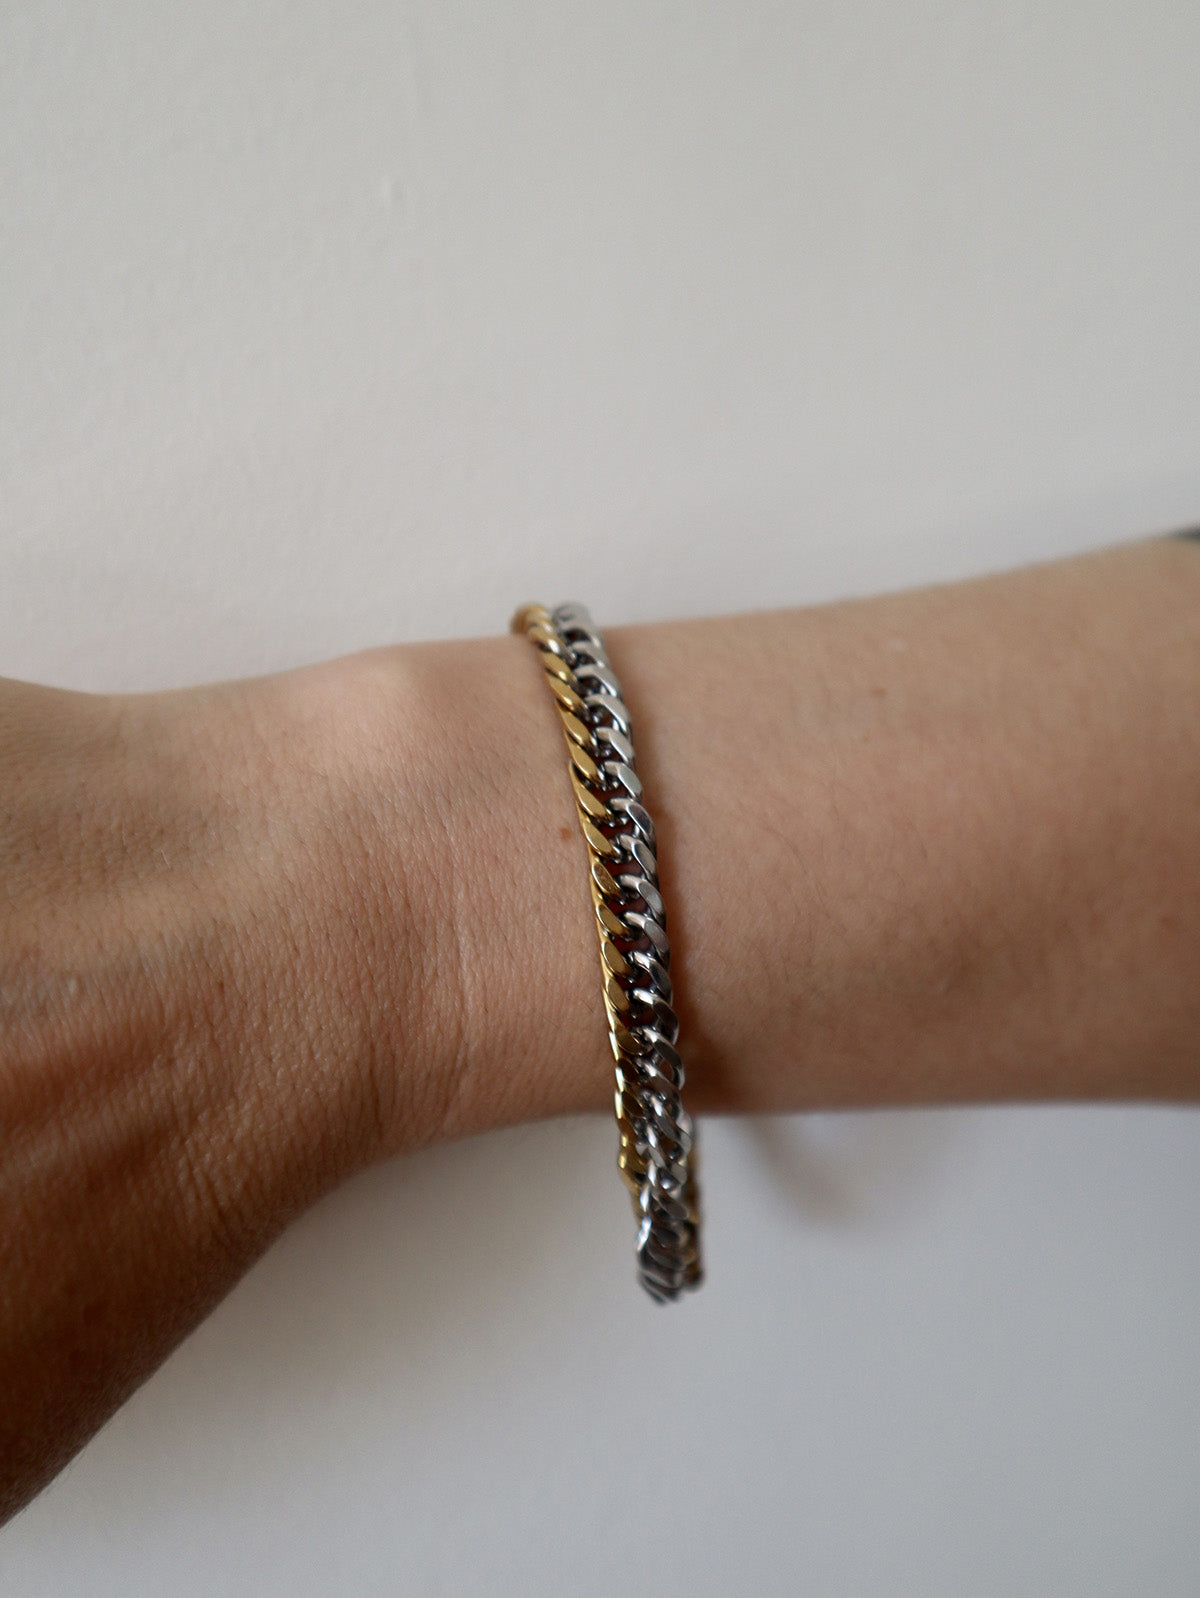 Stainless Steel Gold and Silver Bracelet